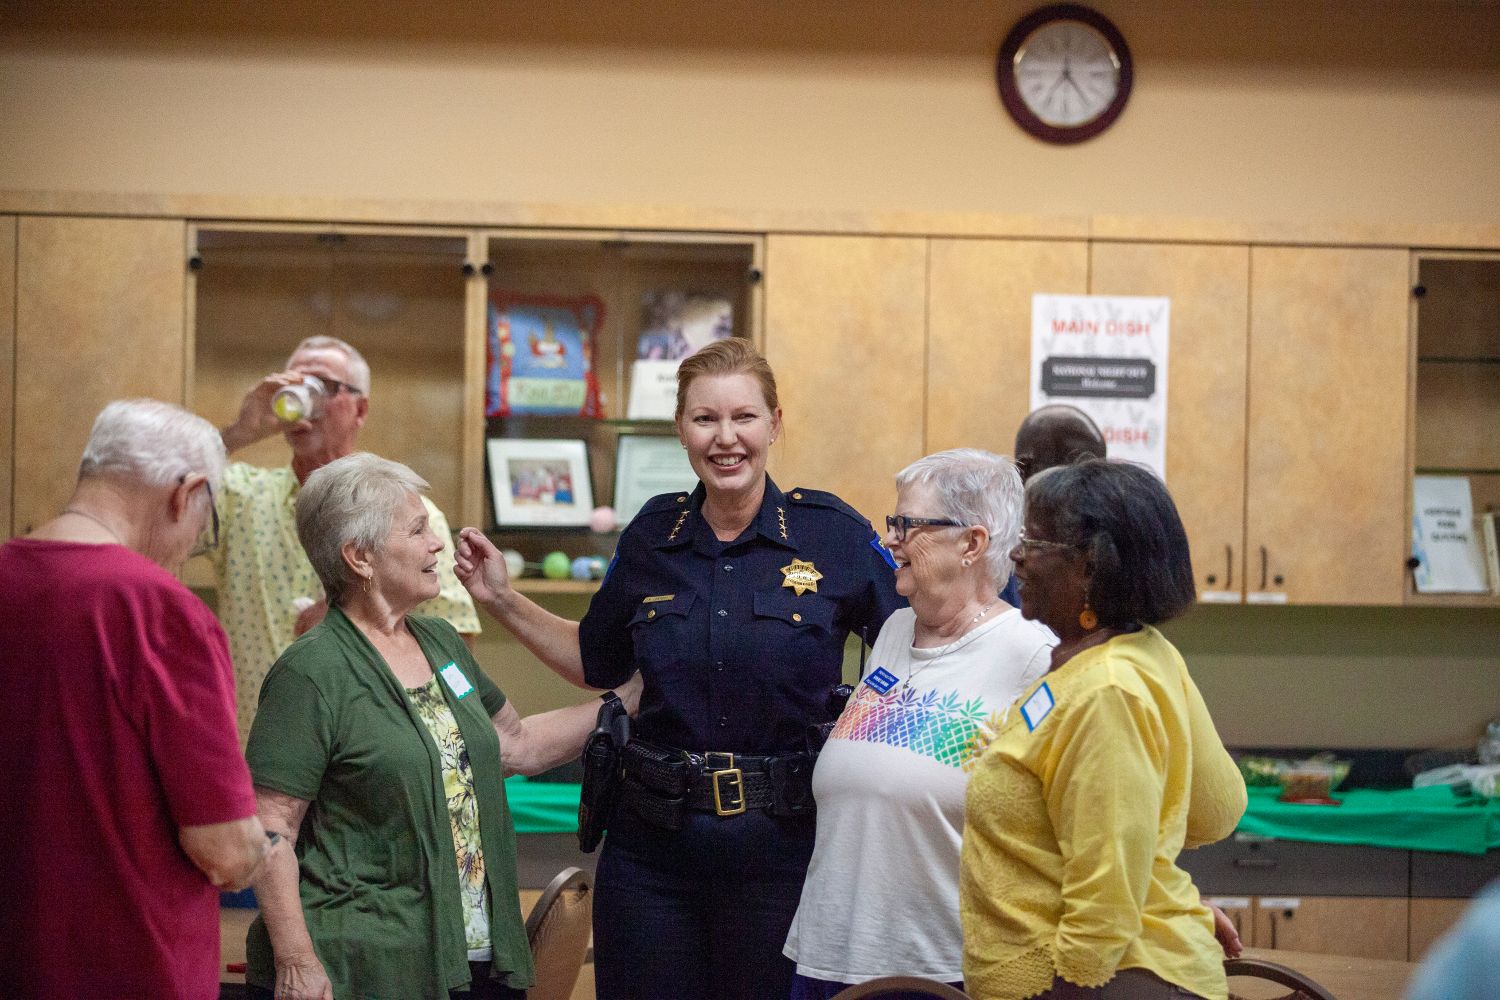 A photo of uniformed Sacramento Police Chief Kathy Lester laughing with a small group of  community members at a community center during National night out